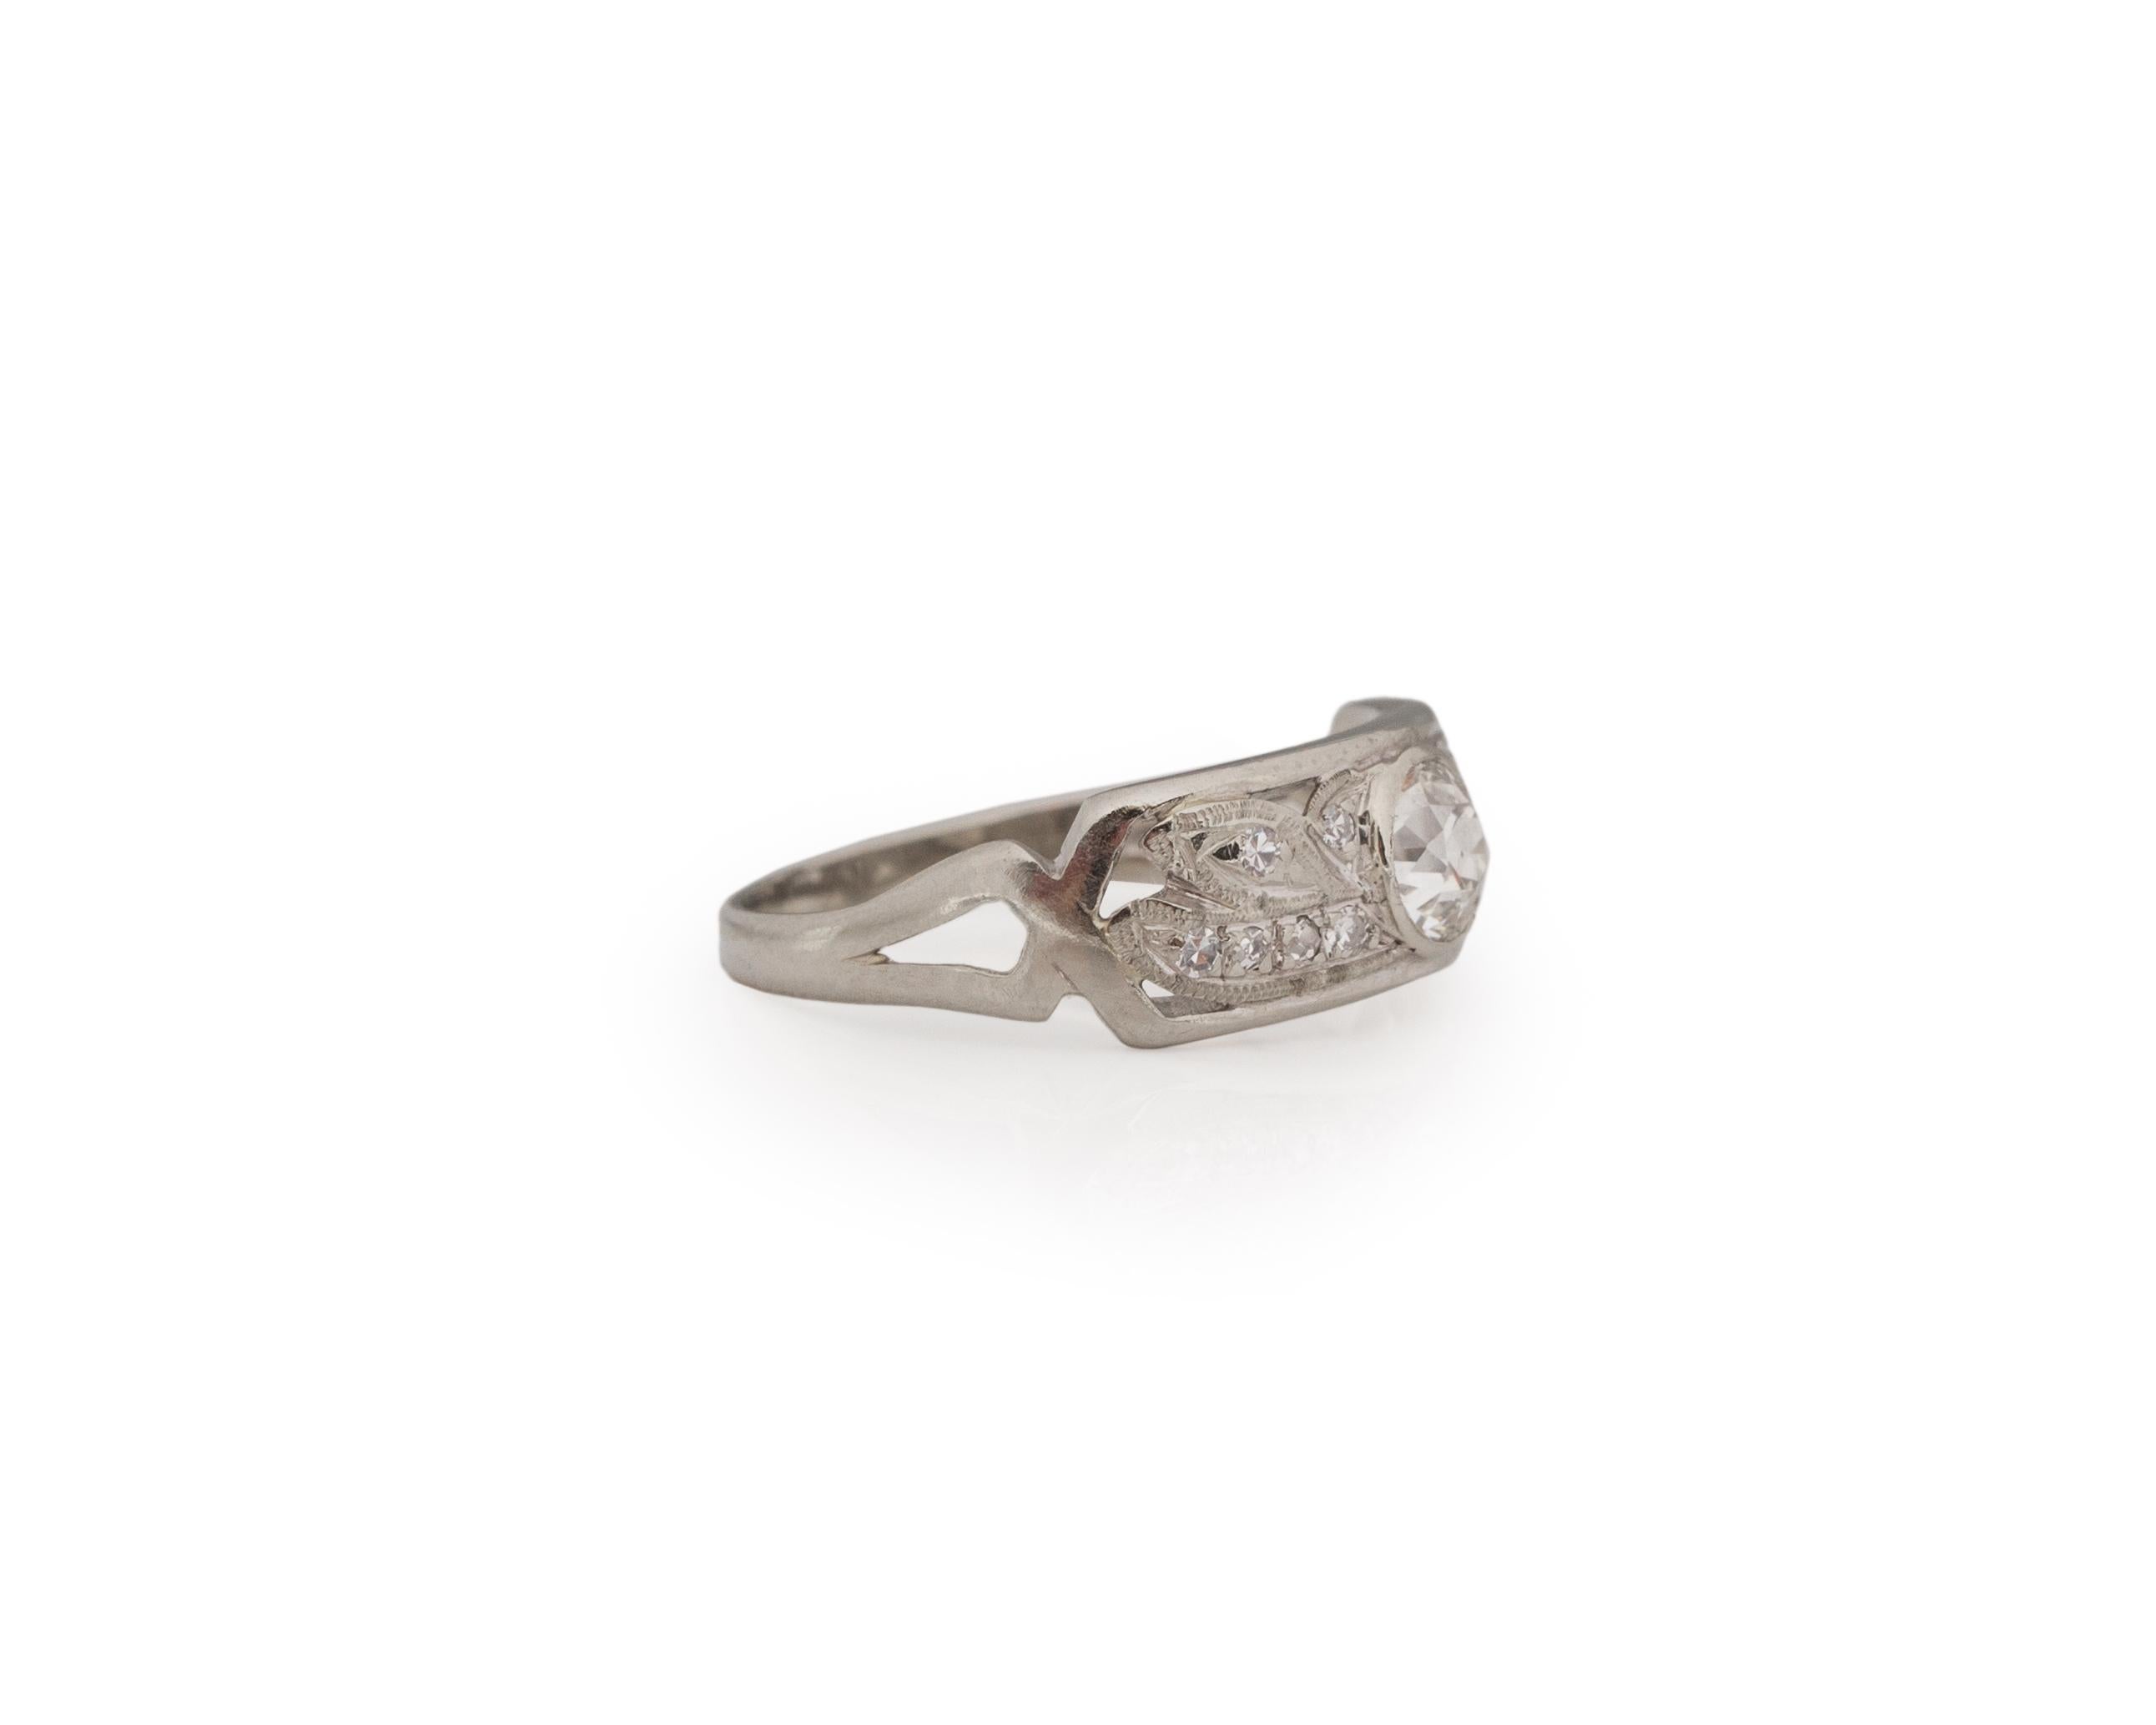 Ring Size: 5.5
Metal Type: Platinum [Hallmarked, and Tested]
Weight: 2.16 grams

Center Diamond Details:
Weight: .40ct
Cut: Old European brilliant
Color: G-H
Clarity: VS

Finger to Top of Stone Measurement: 3mm
Condition: Excellent